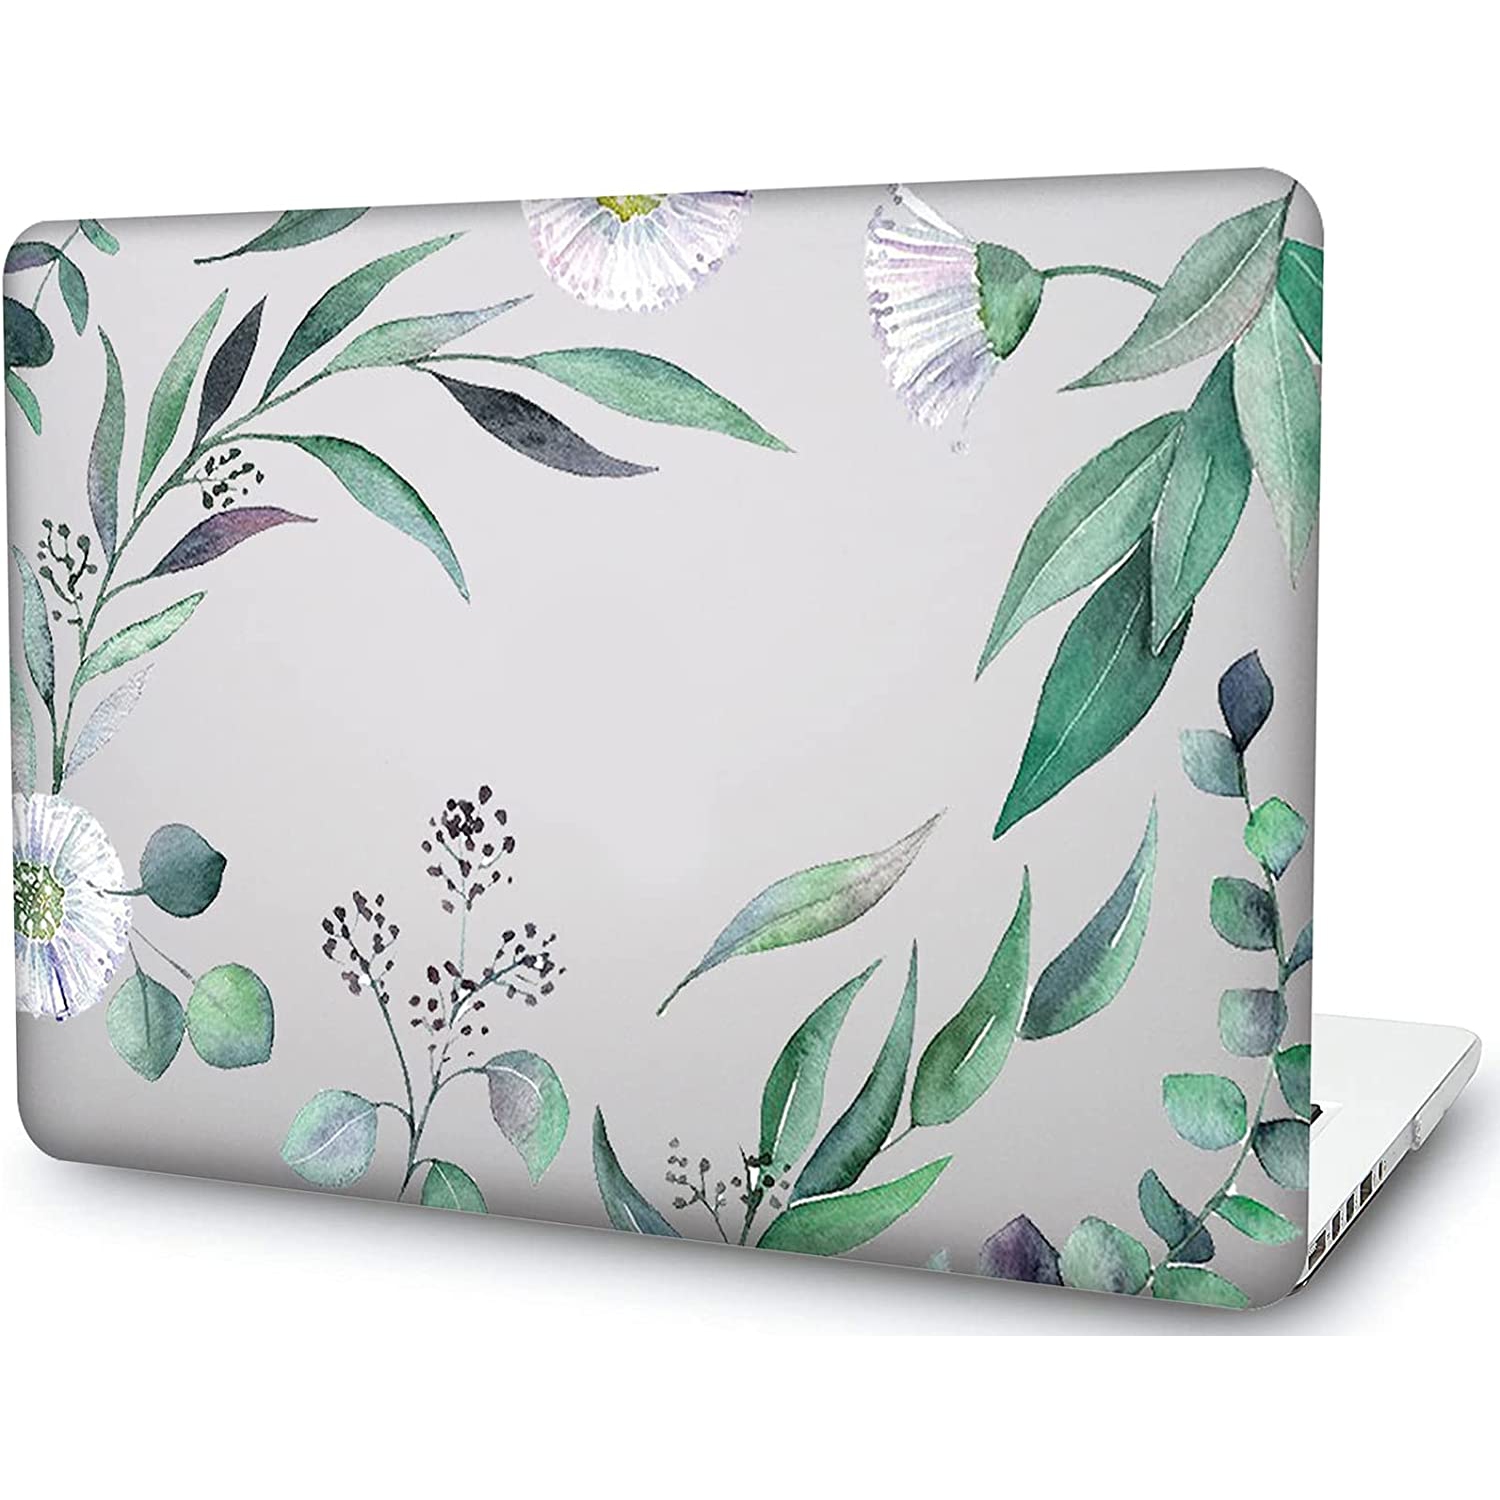 Dandelion Green Leaves Laptop Cover Compatible with MacBook Air 11 Inch/11.6 Inch Case(2015 2014 2013 2012 Release A1465/A1370), Plastic Hard Shell Case Cover